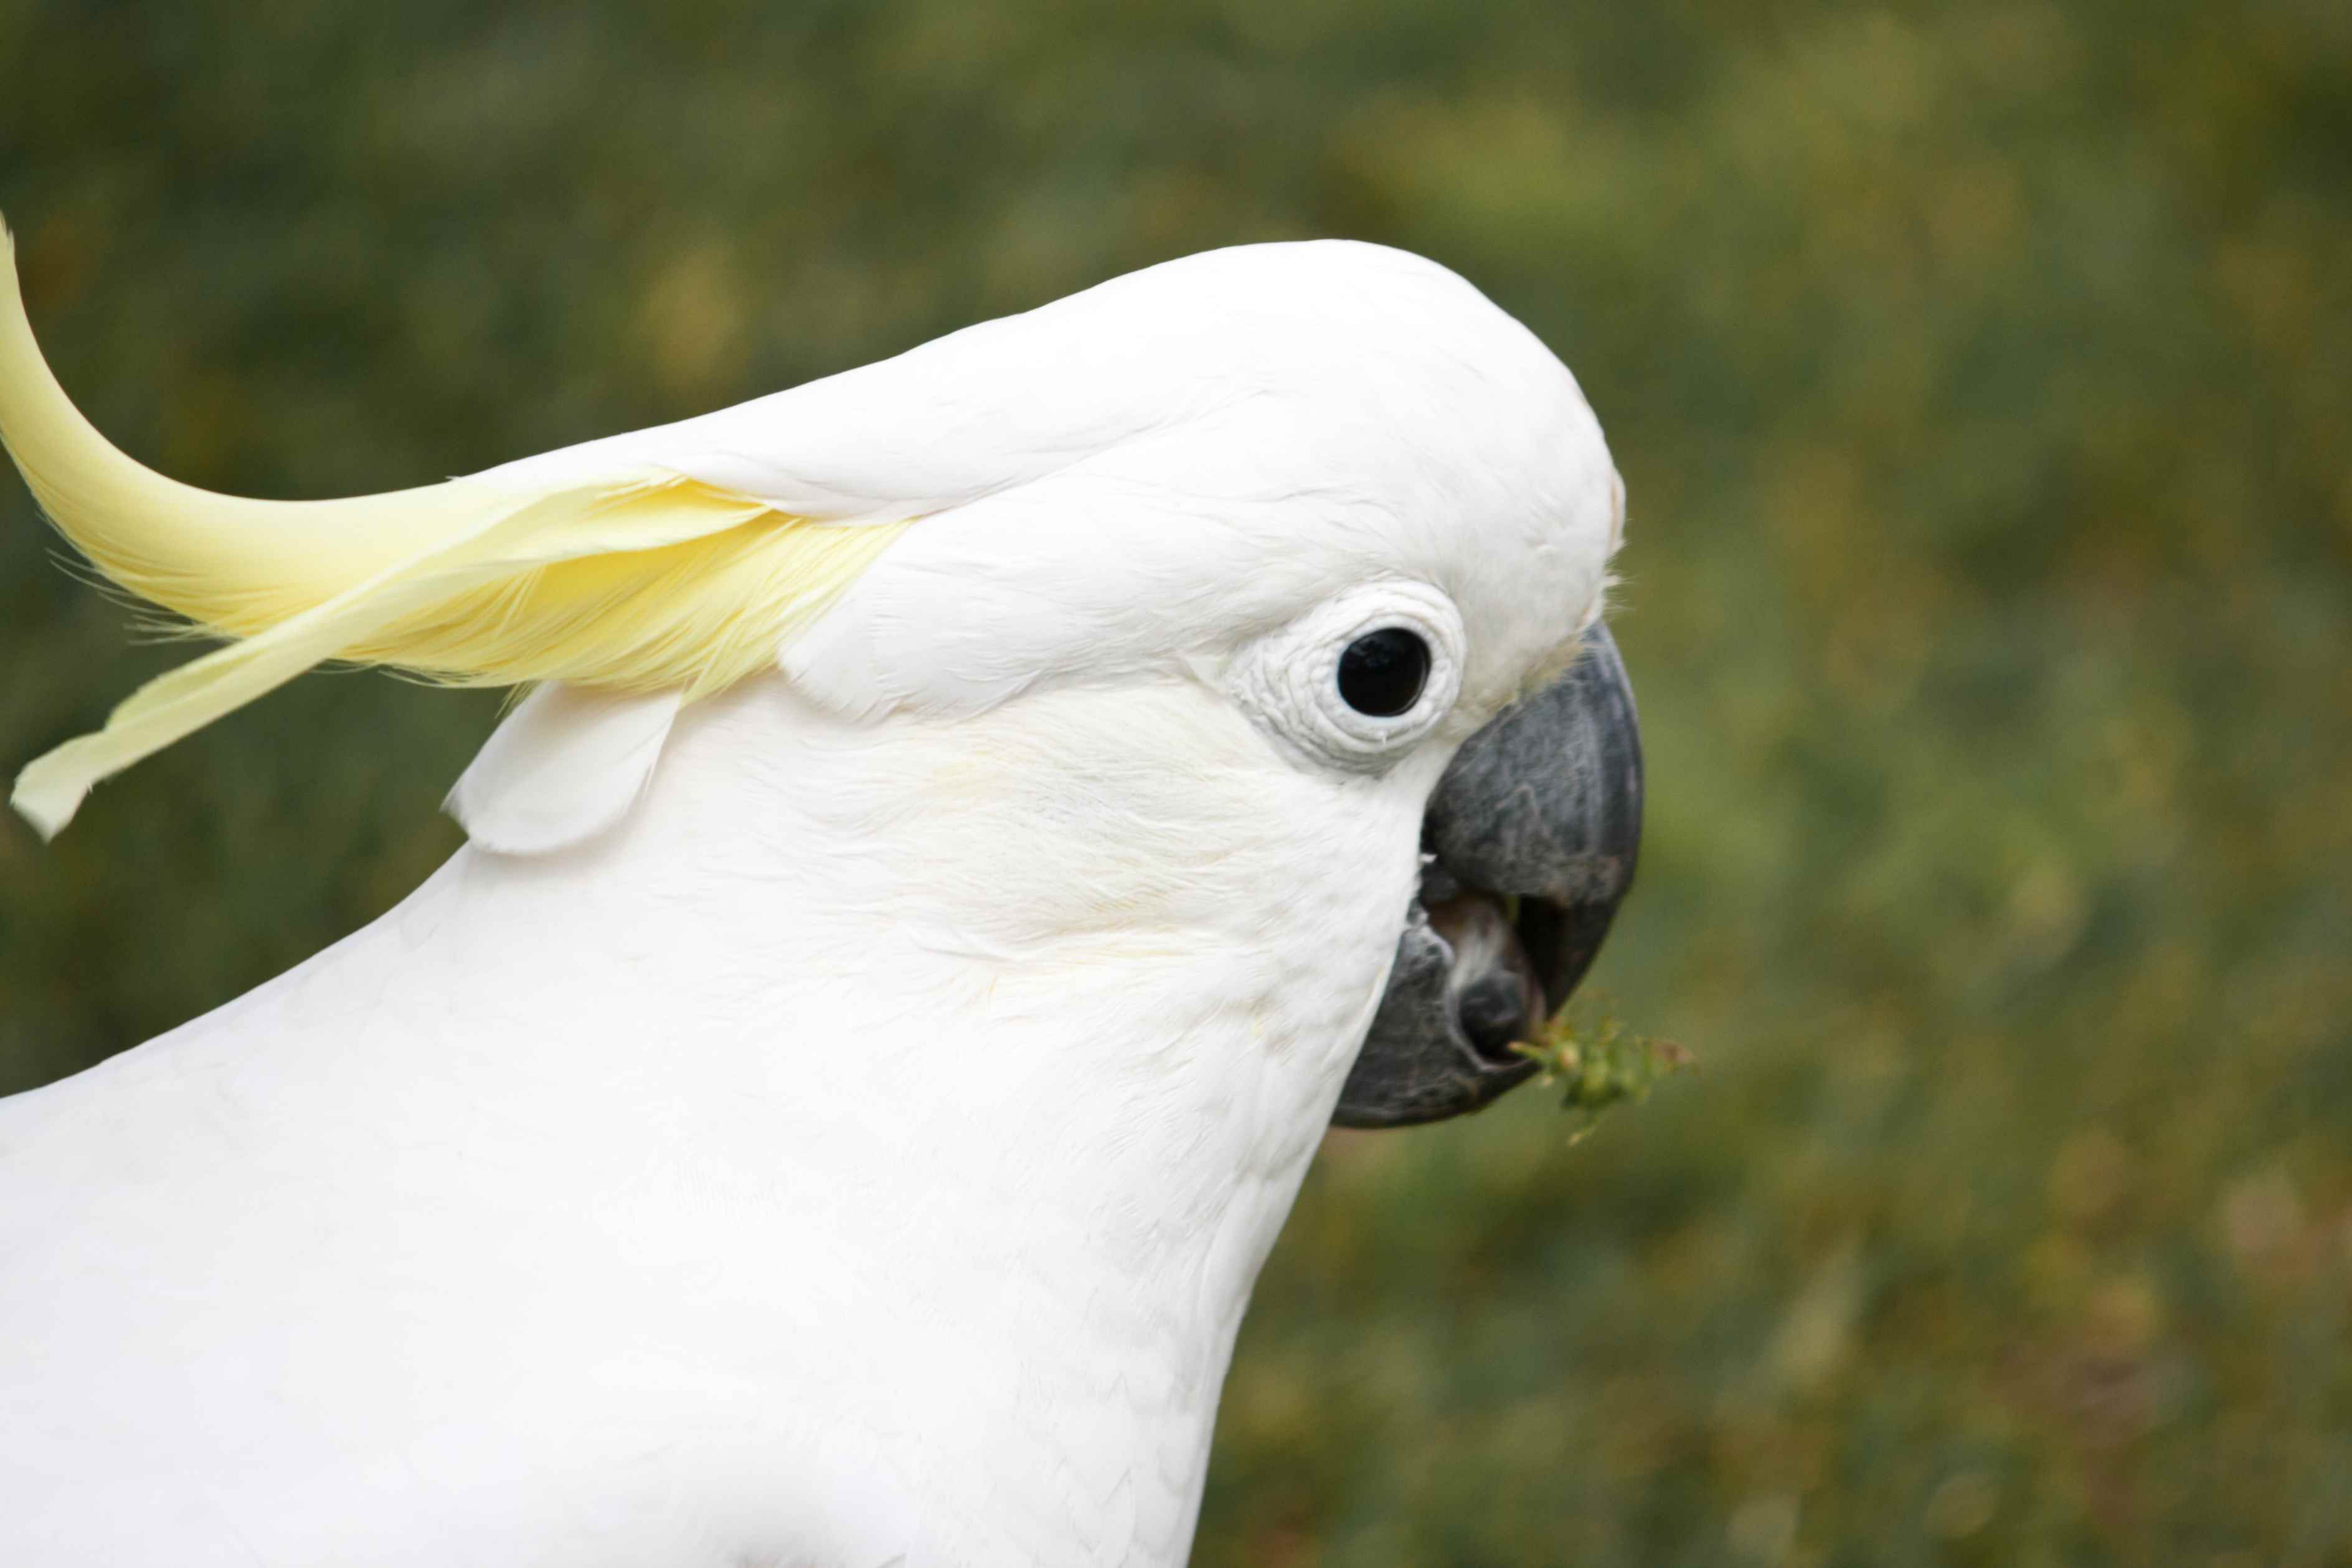 The face of a sulphur-crested cockatoo against a green background